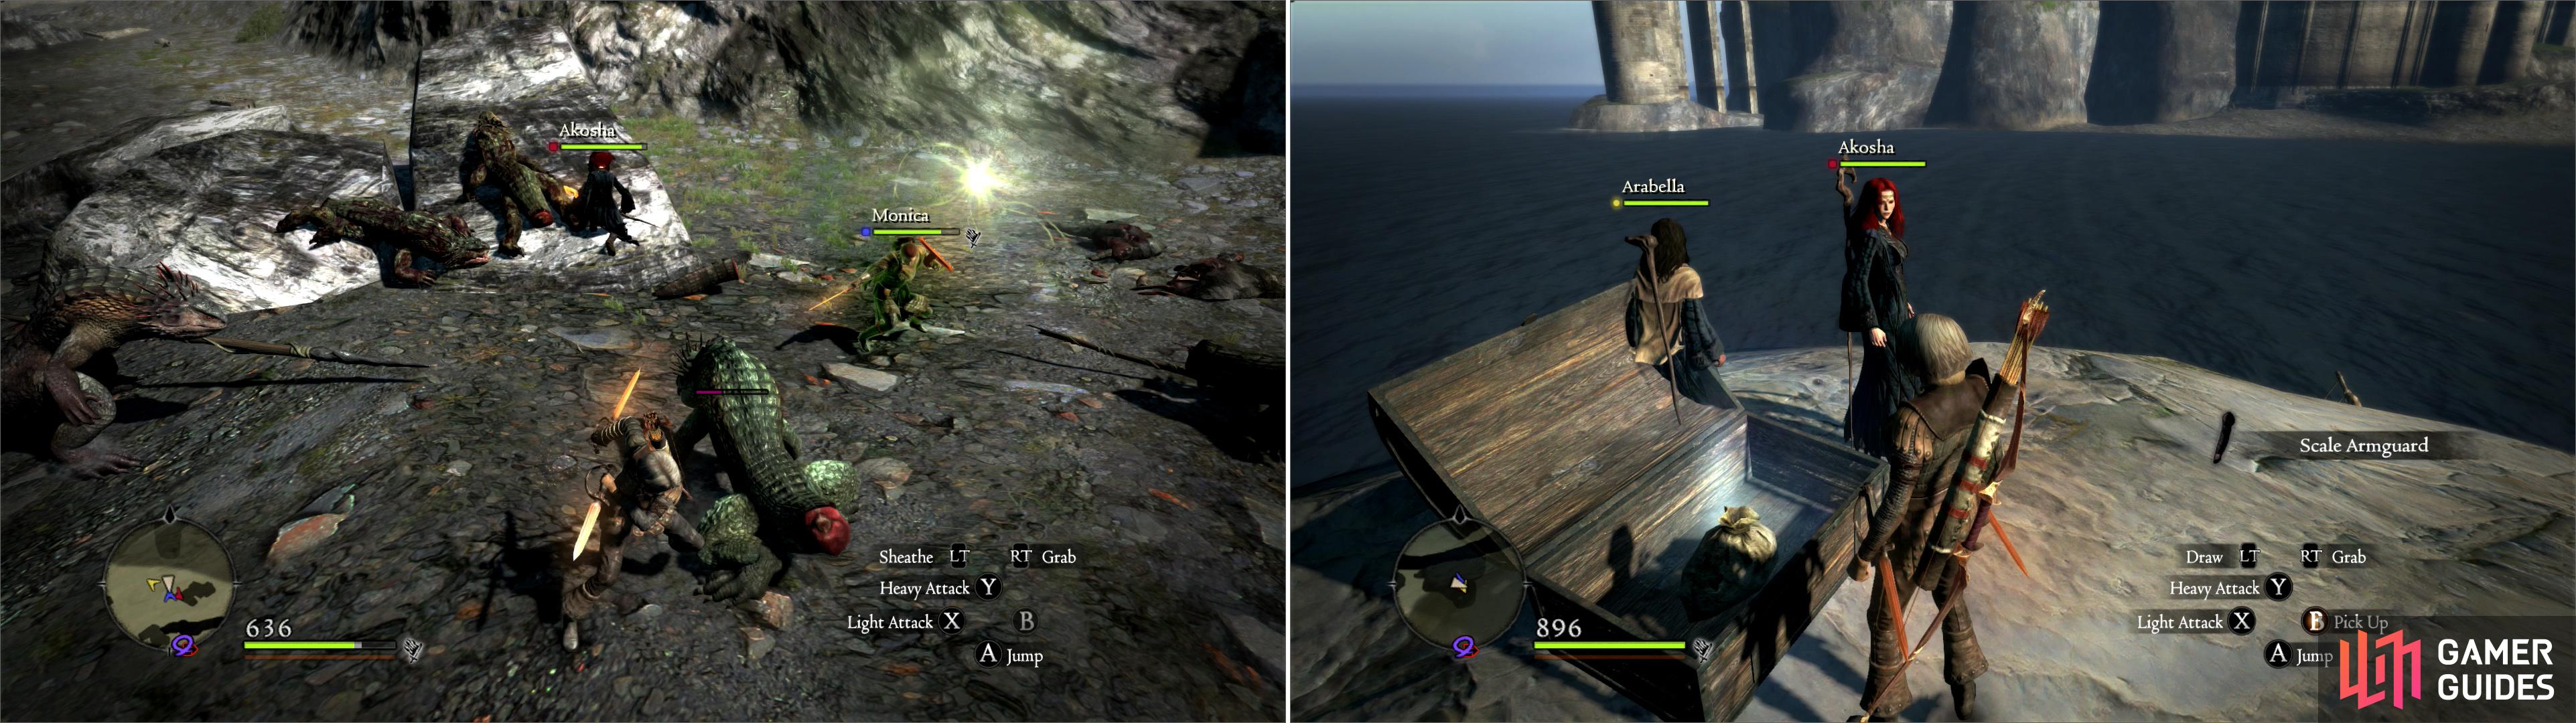 Be sure to try to cut the tail off Saurians you fight to significantly weaken them (left). Again, for defeating these lizards you’ll be able to score some loot (right).